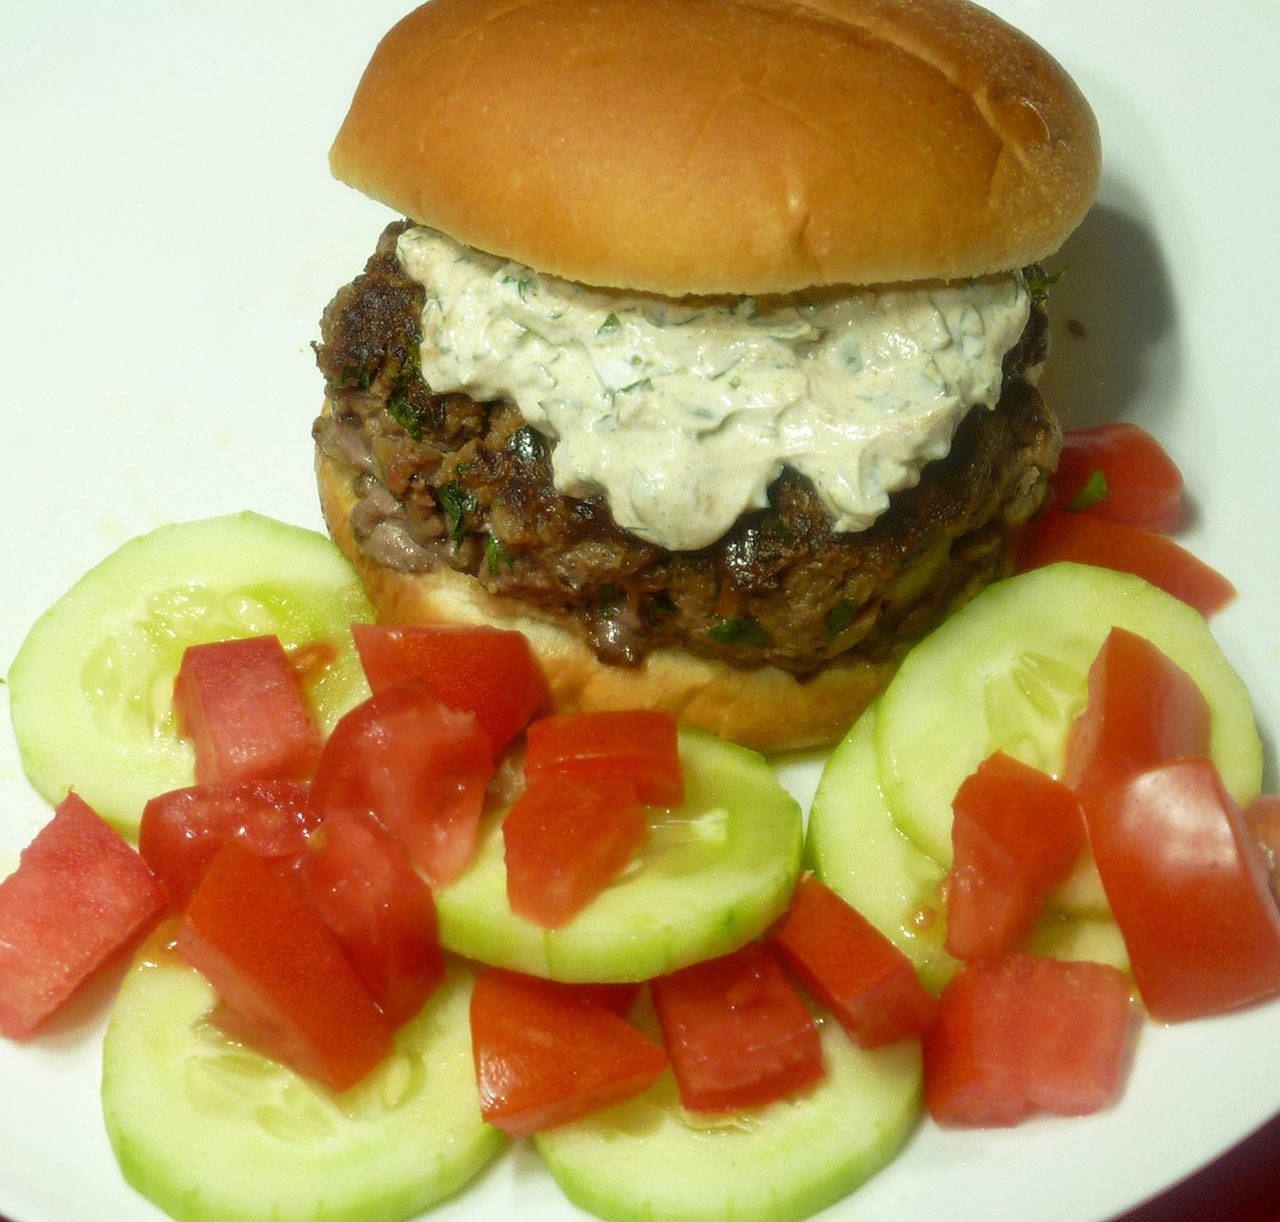 Top each Moroccan burger with an herbed and spiced yogurt sauce. (Linda Gassenheimer)